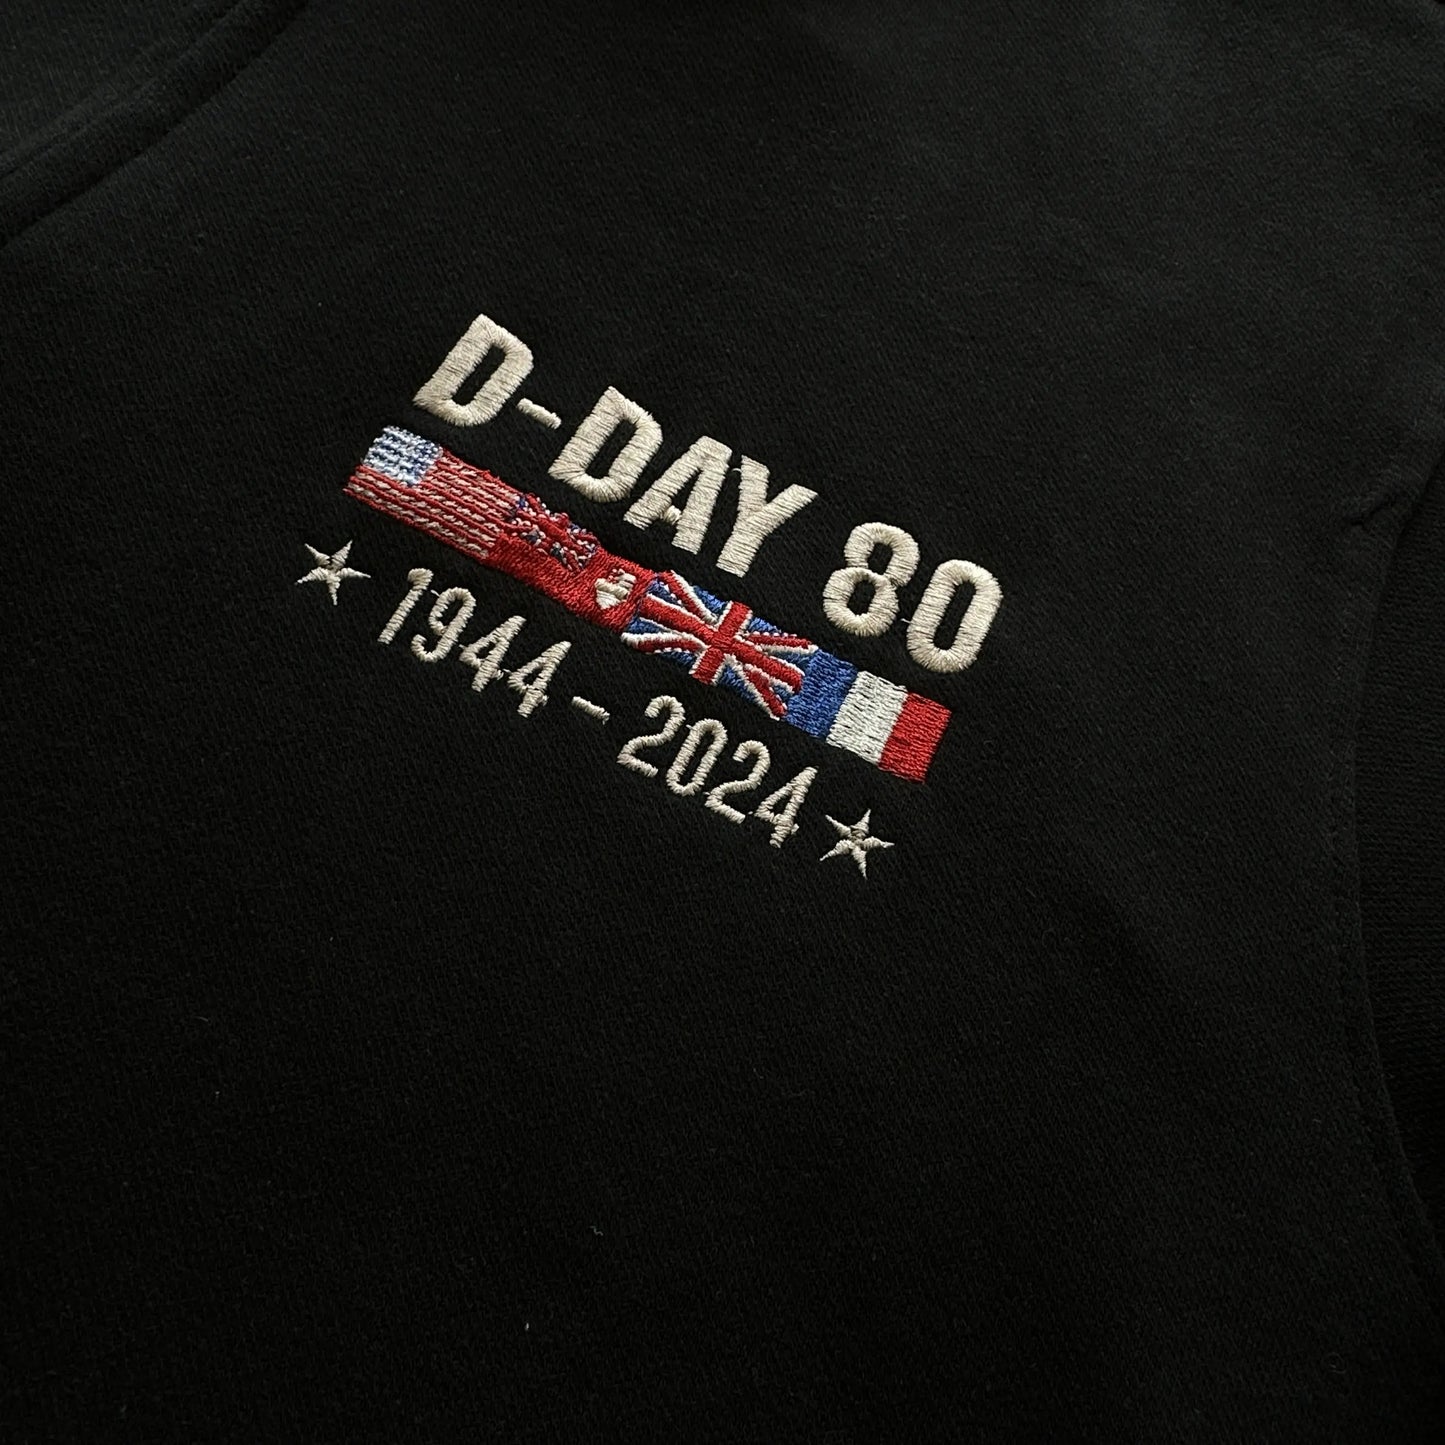 D-Day 80th Anniversary Embroidered Jacket with free personalization